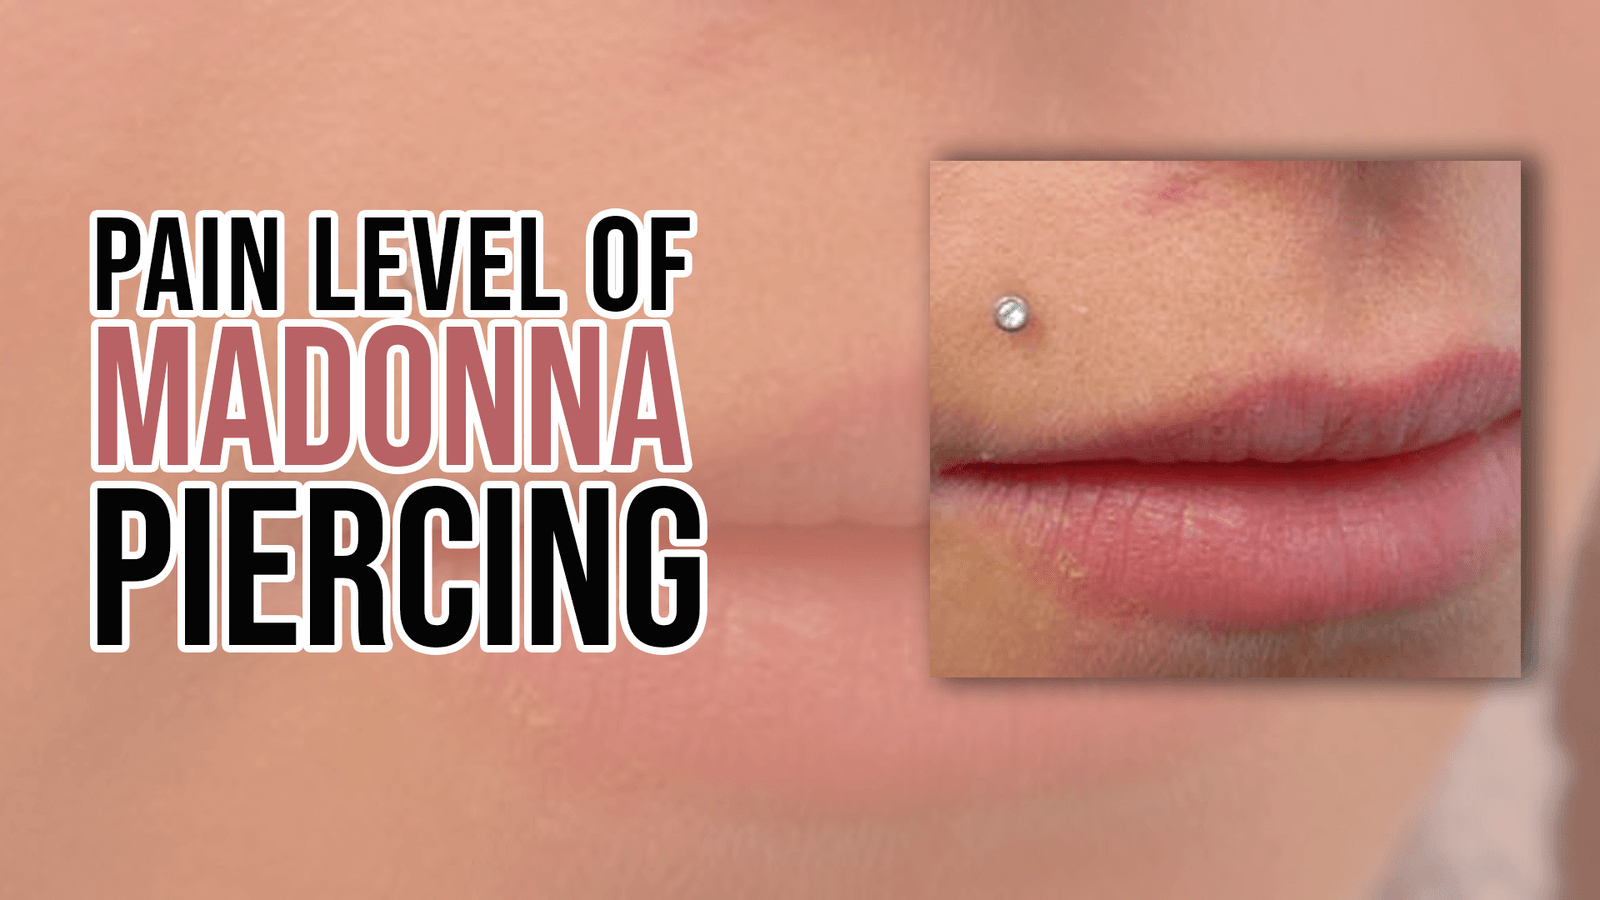 Pain Level of Madonna Piercing